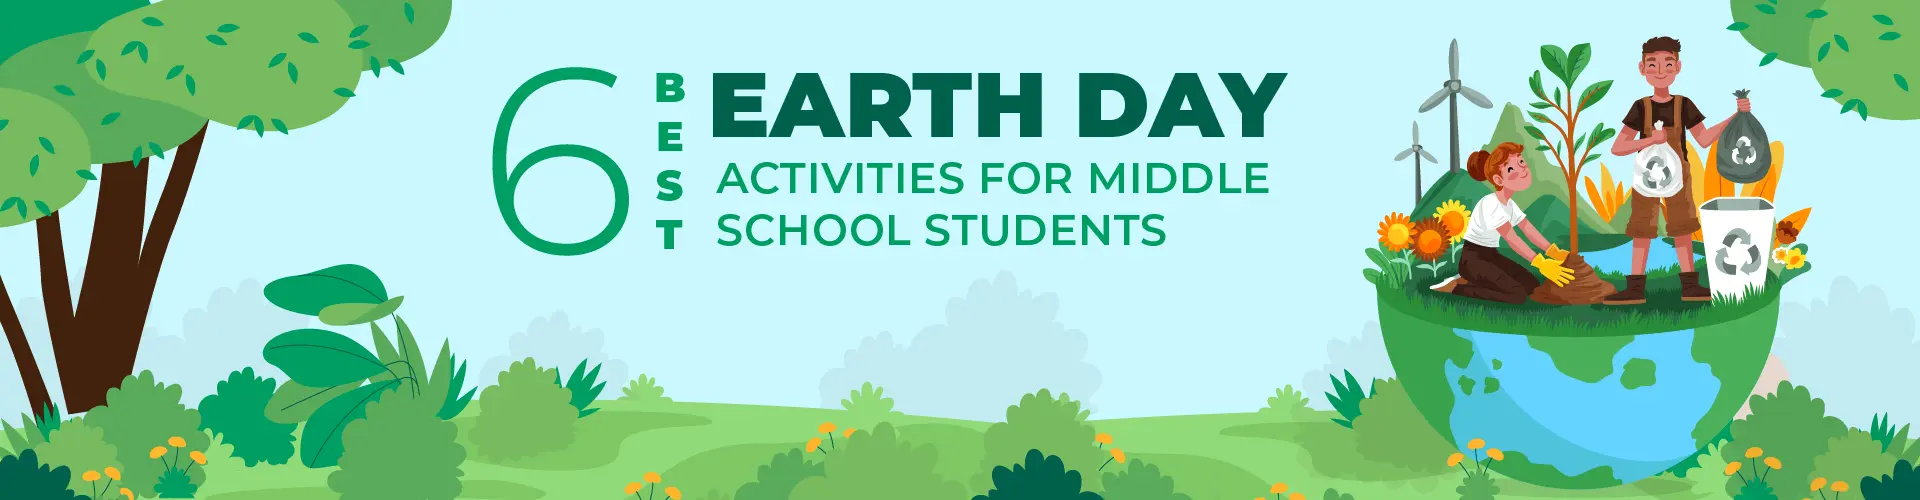 earth day activities middle school students